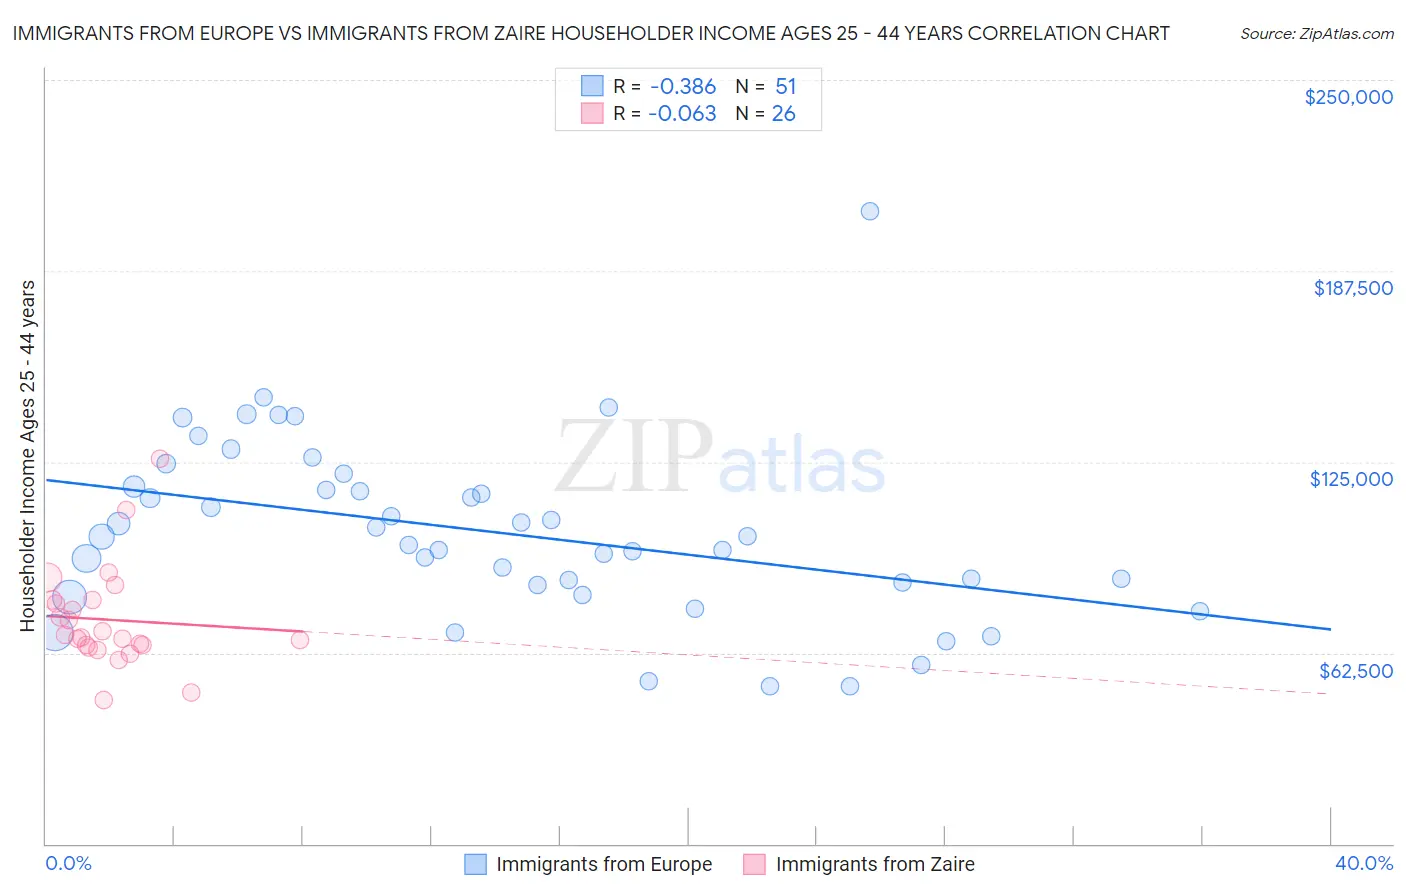 Immigrants from Europe vs Immigrants from Zaire Householder Income Ages 25 - 44 years